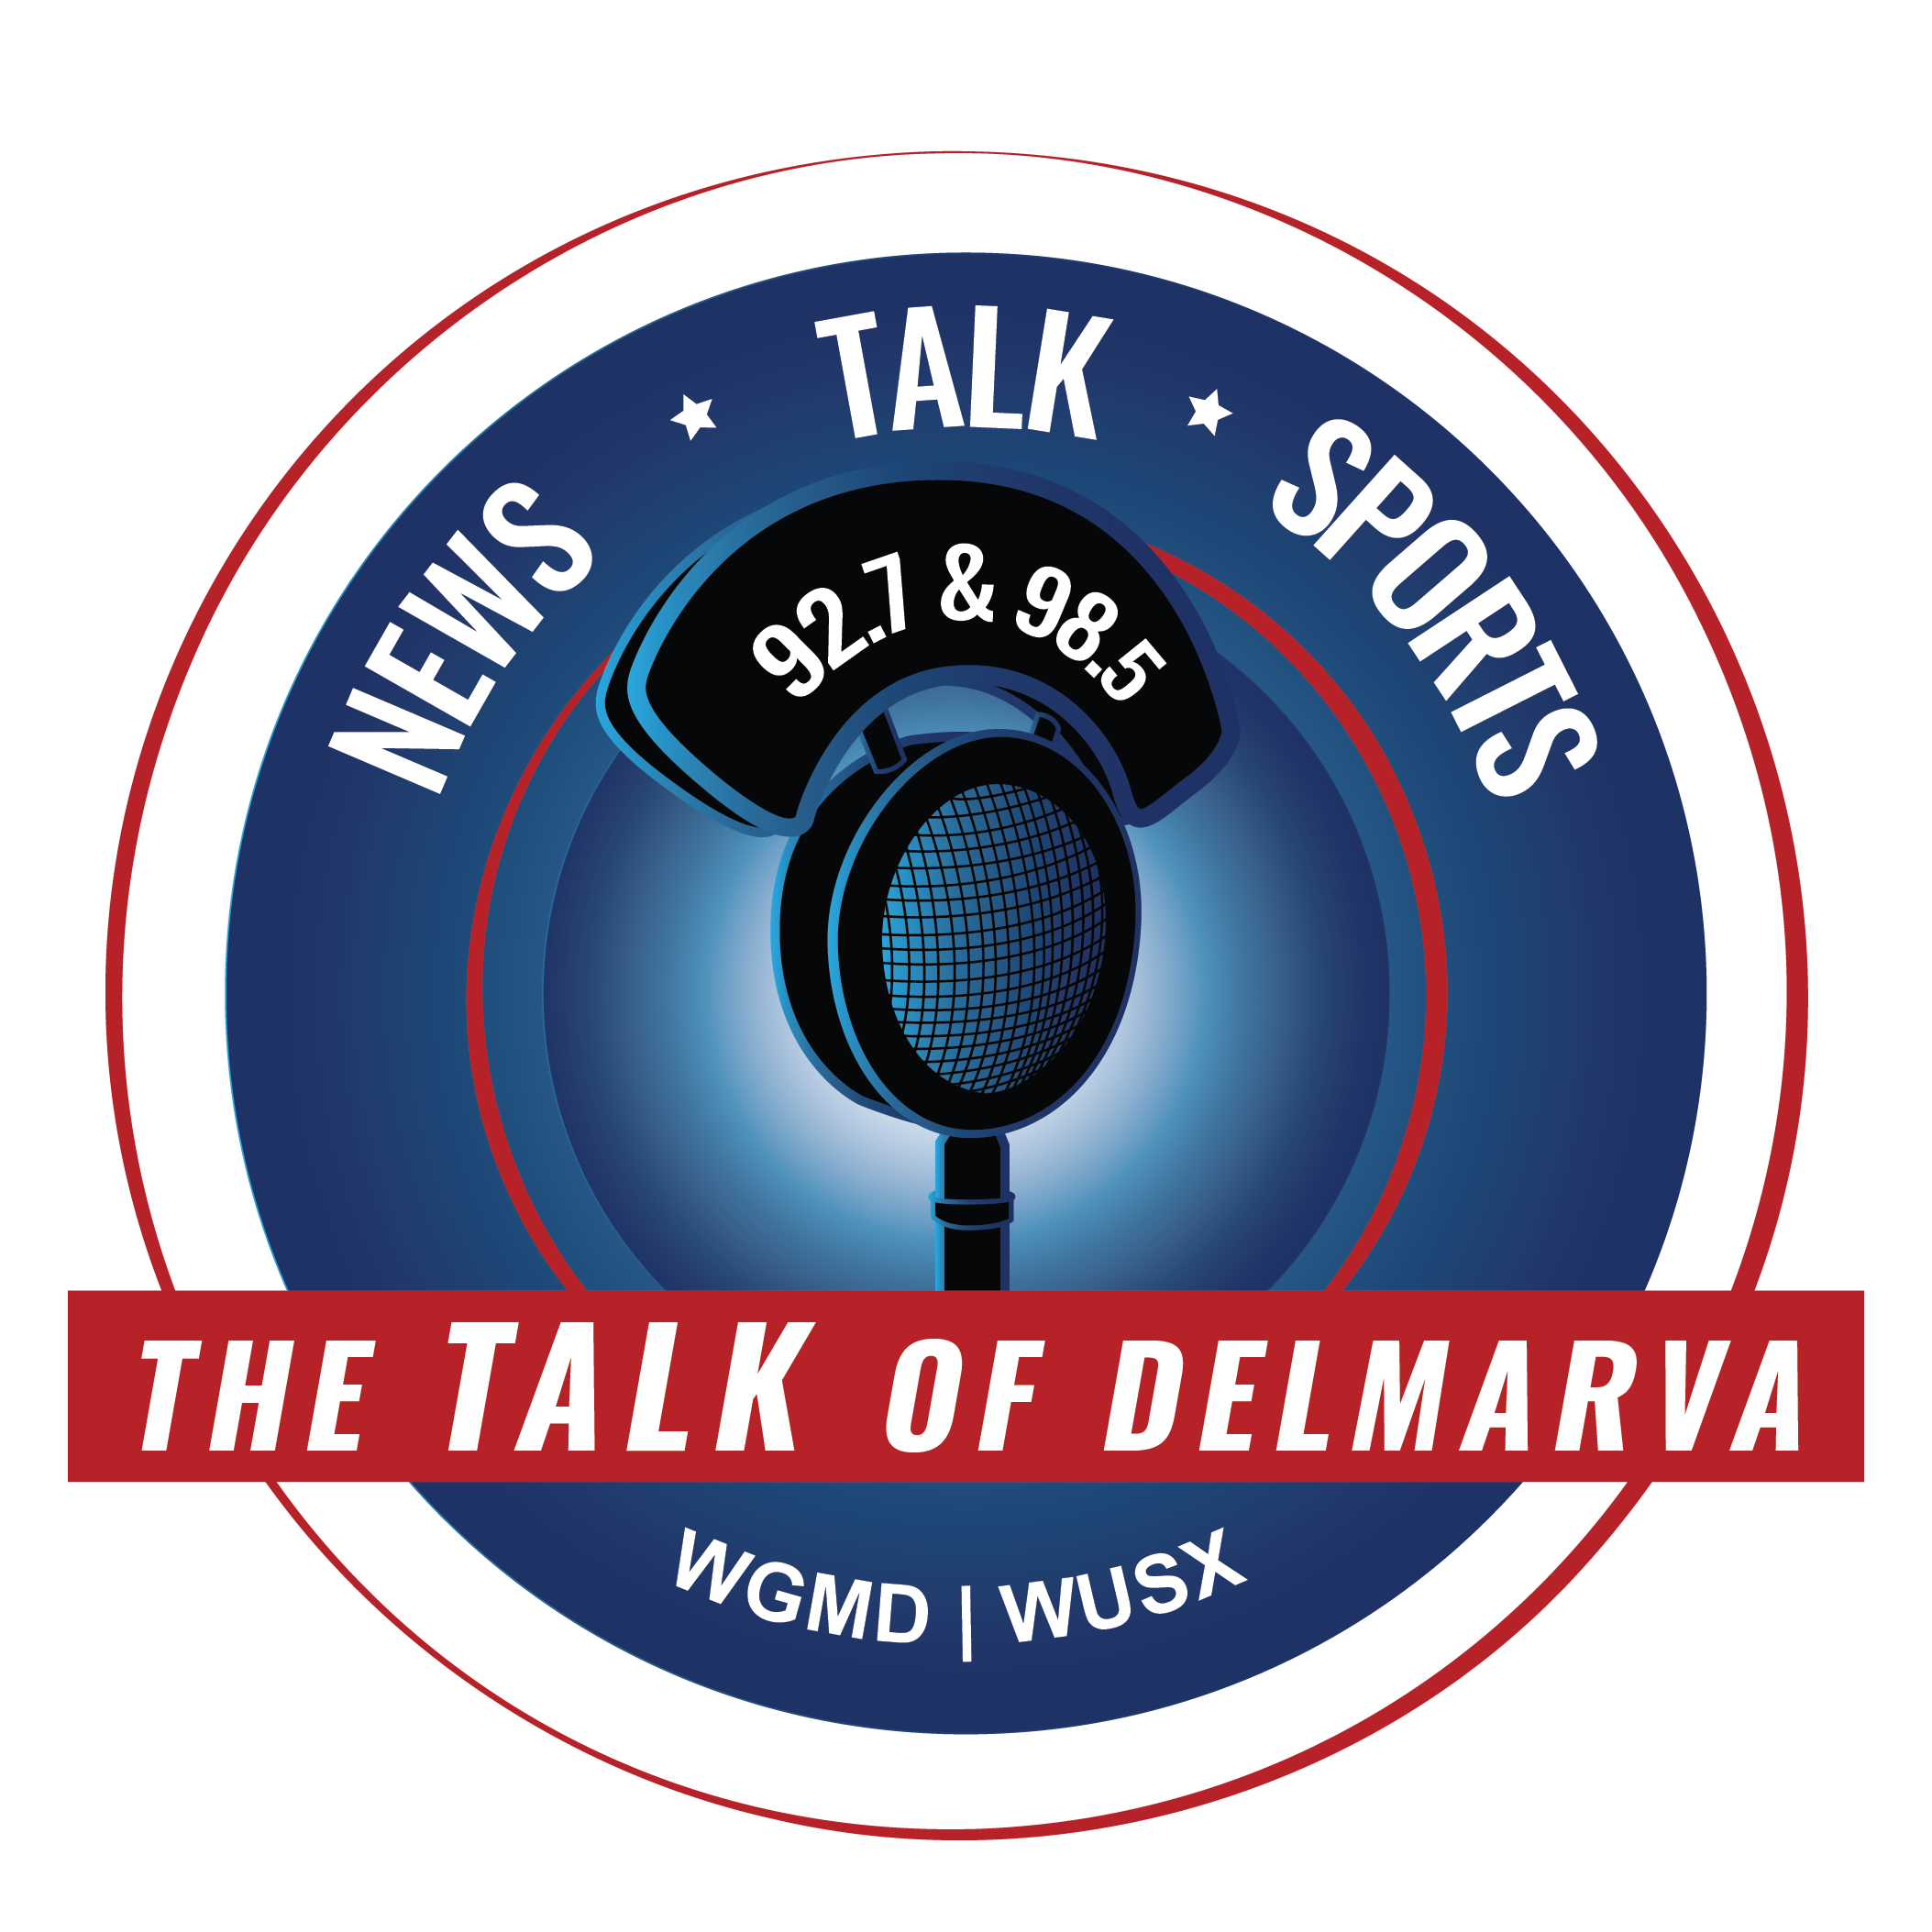 the talk of delmarva logo with a microphone